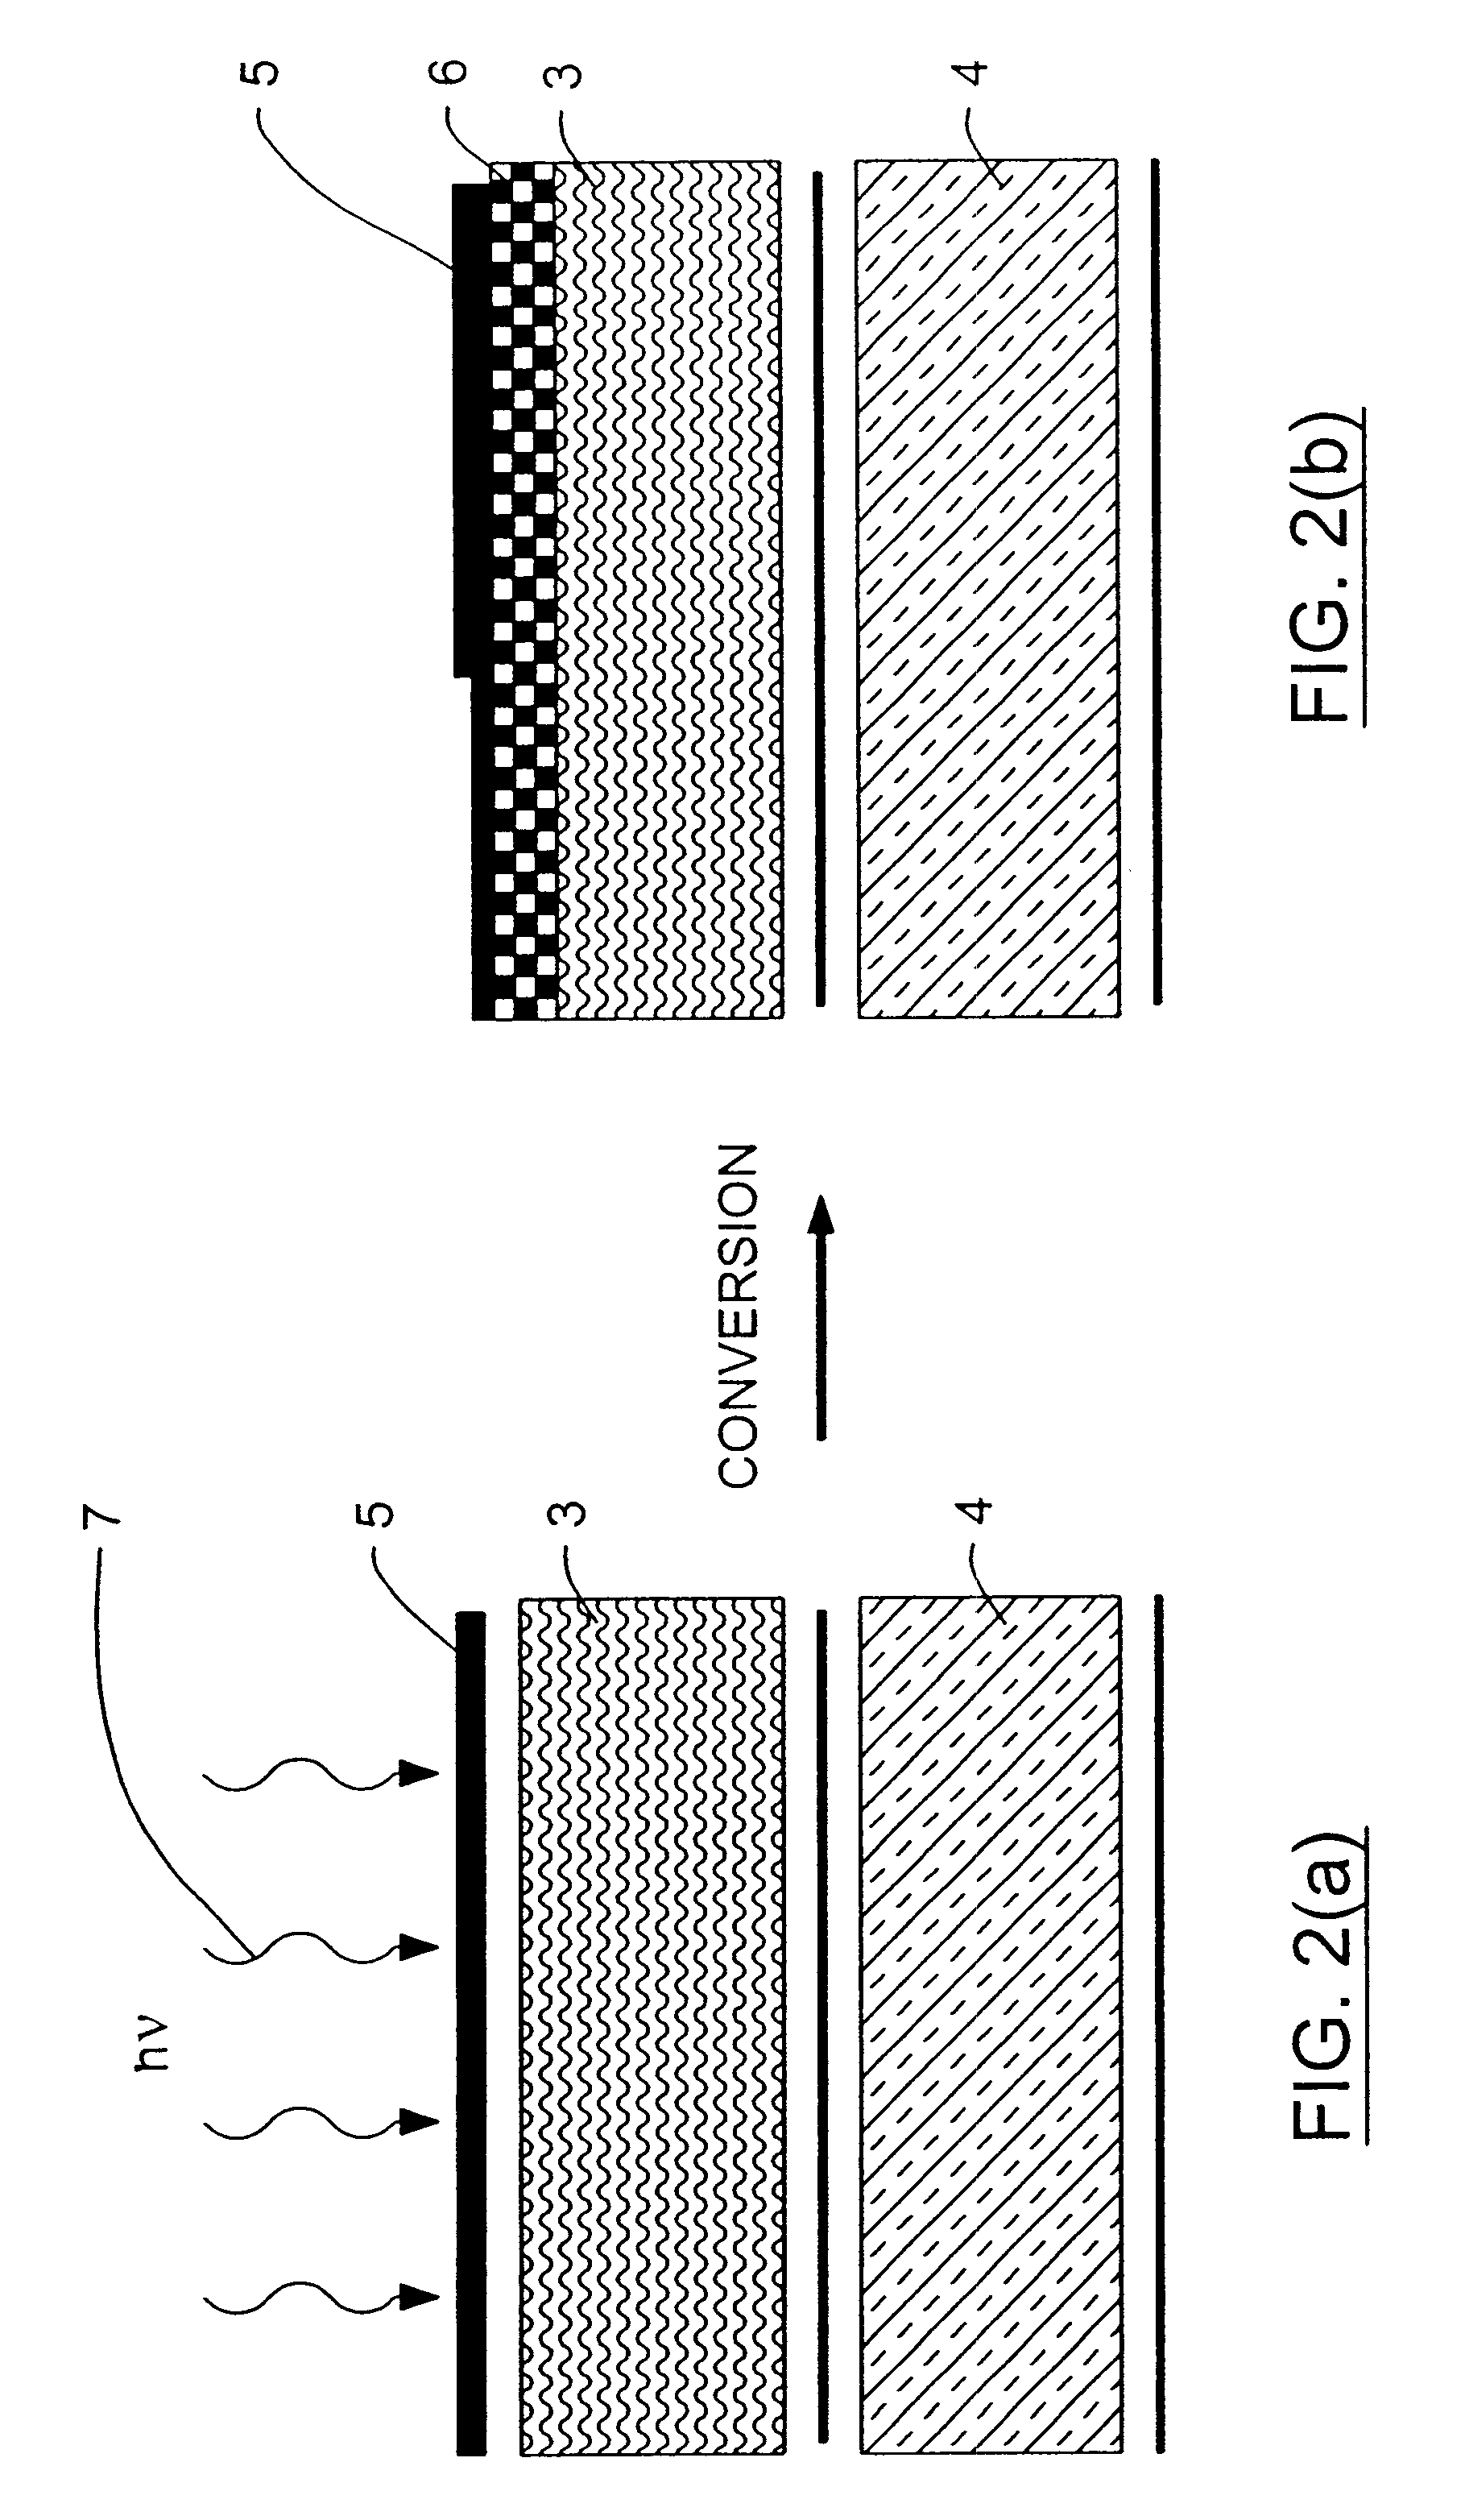 Method for obtaining reduced thermal flux in silicone resin composites